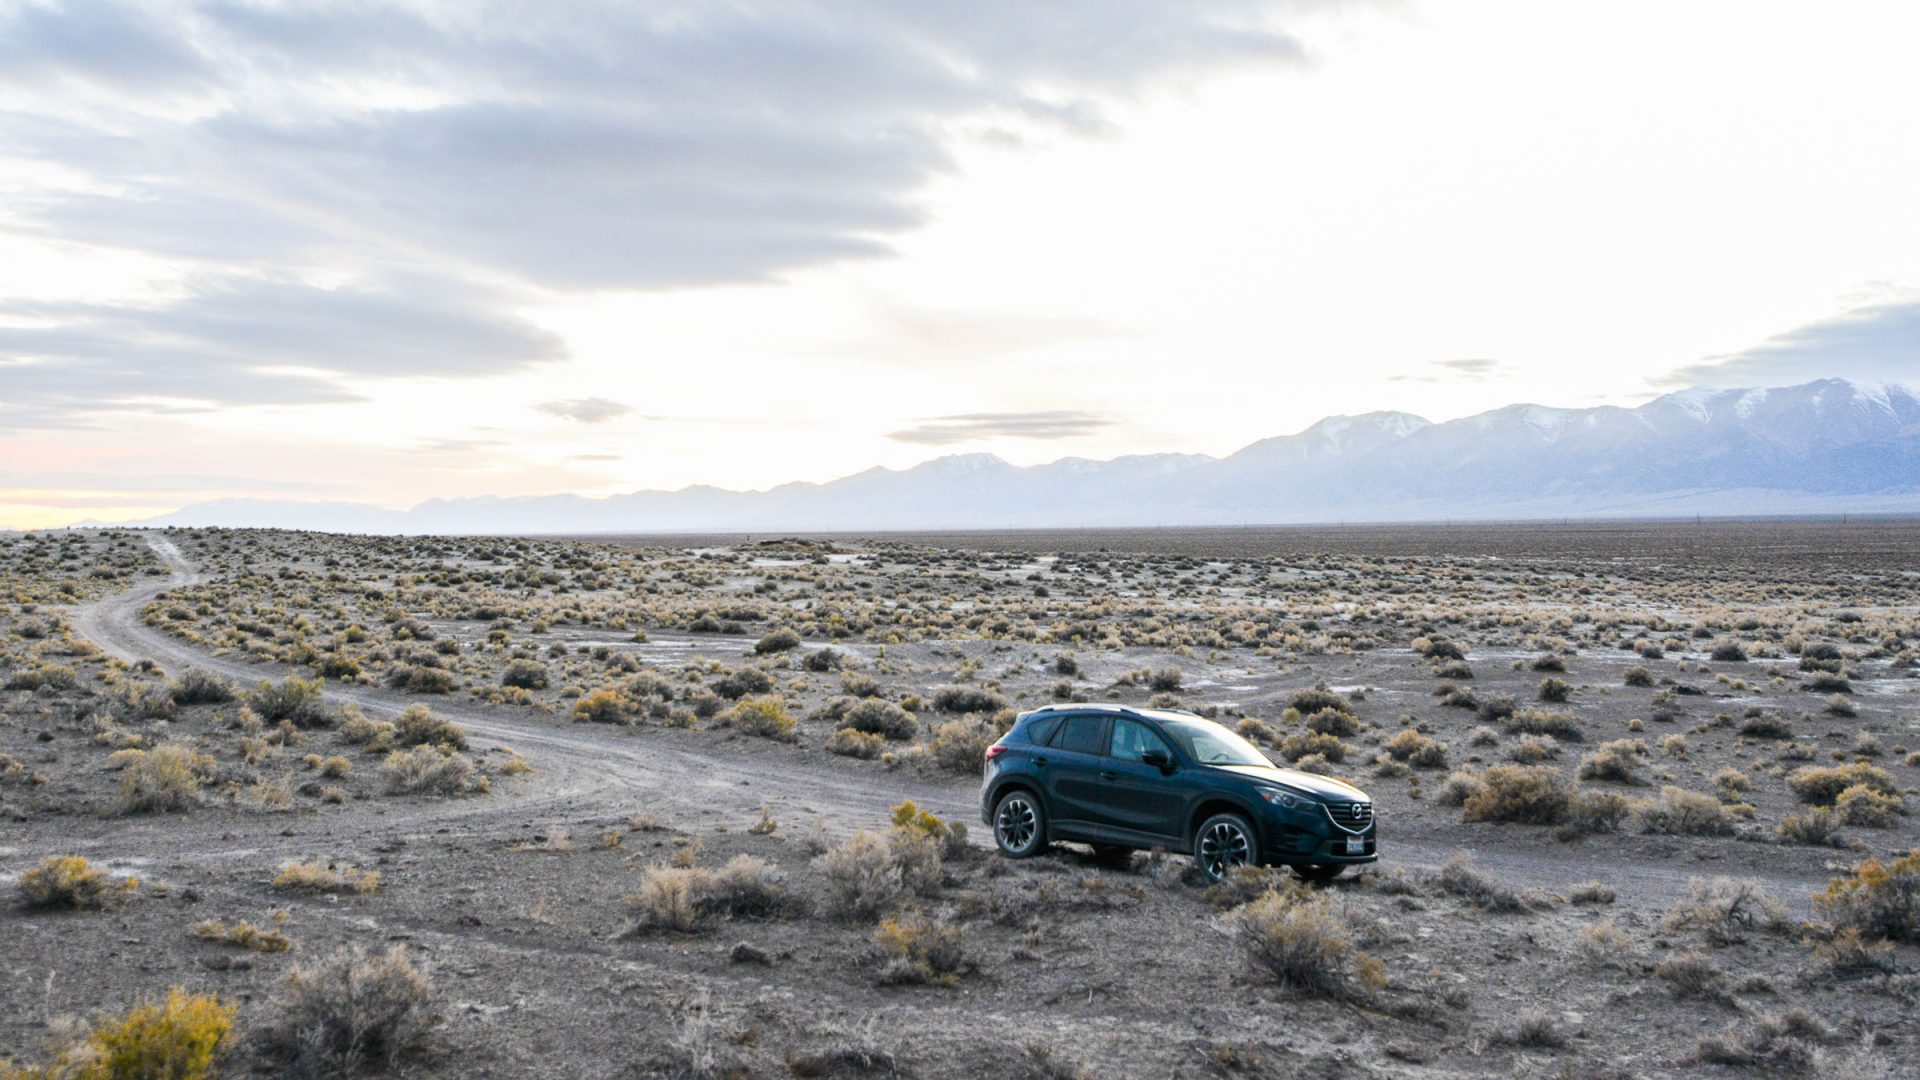 How to make friends on “America’s loneliest road”